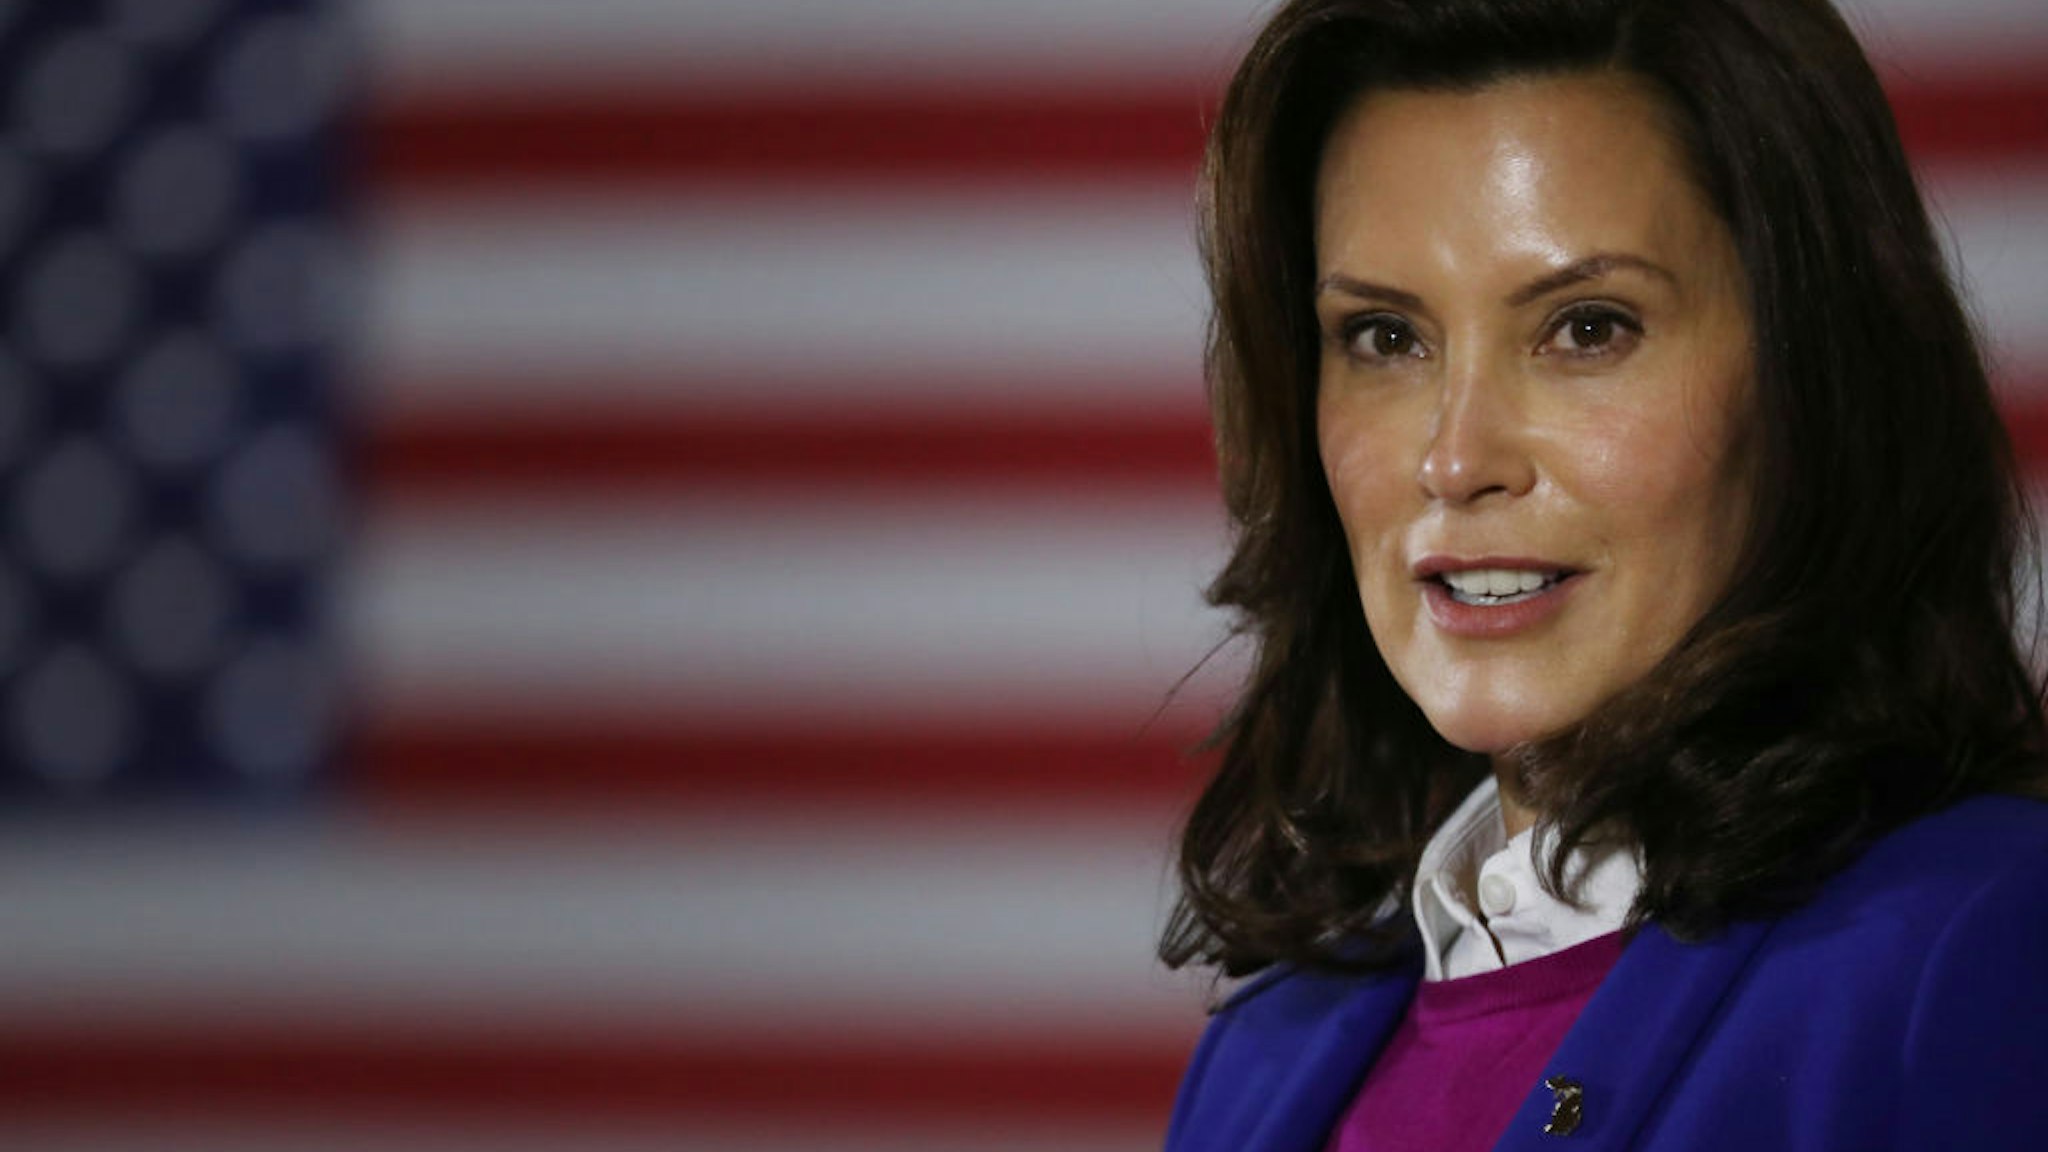 SOUTHFIELD, MICHIGAN - OCTOBER 16: Gov. Gretchen Whitmer introduces Democratic presidential nominee Joe Biden delivers remarks about health care at Beech Woods Recreation Center October 16, 2020 in Southfield,m Michigan. With 18 days until the election, Biden is campaigning in Michigan, a state President Donald Trump won in 2016 by less than 11,000 votes, the narrowest margin of victory in the state's presidential election history.